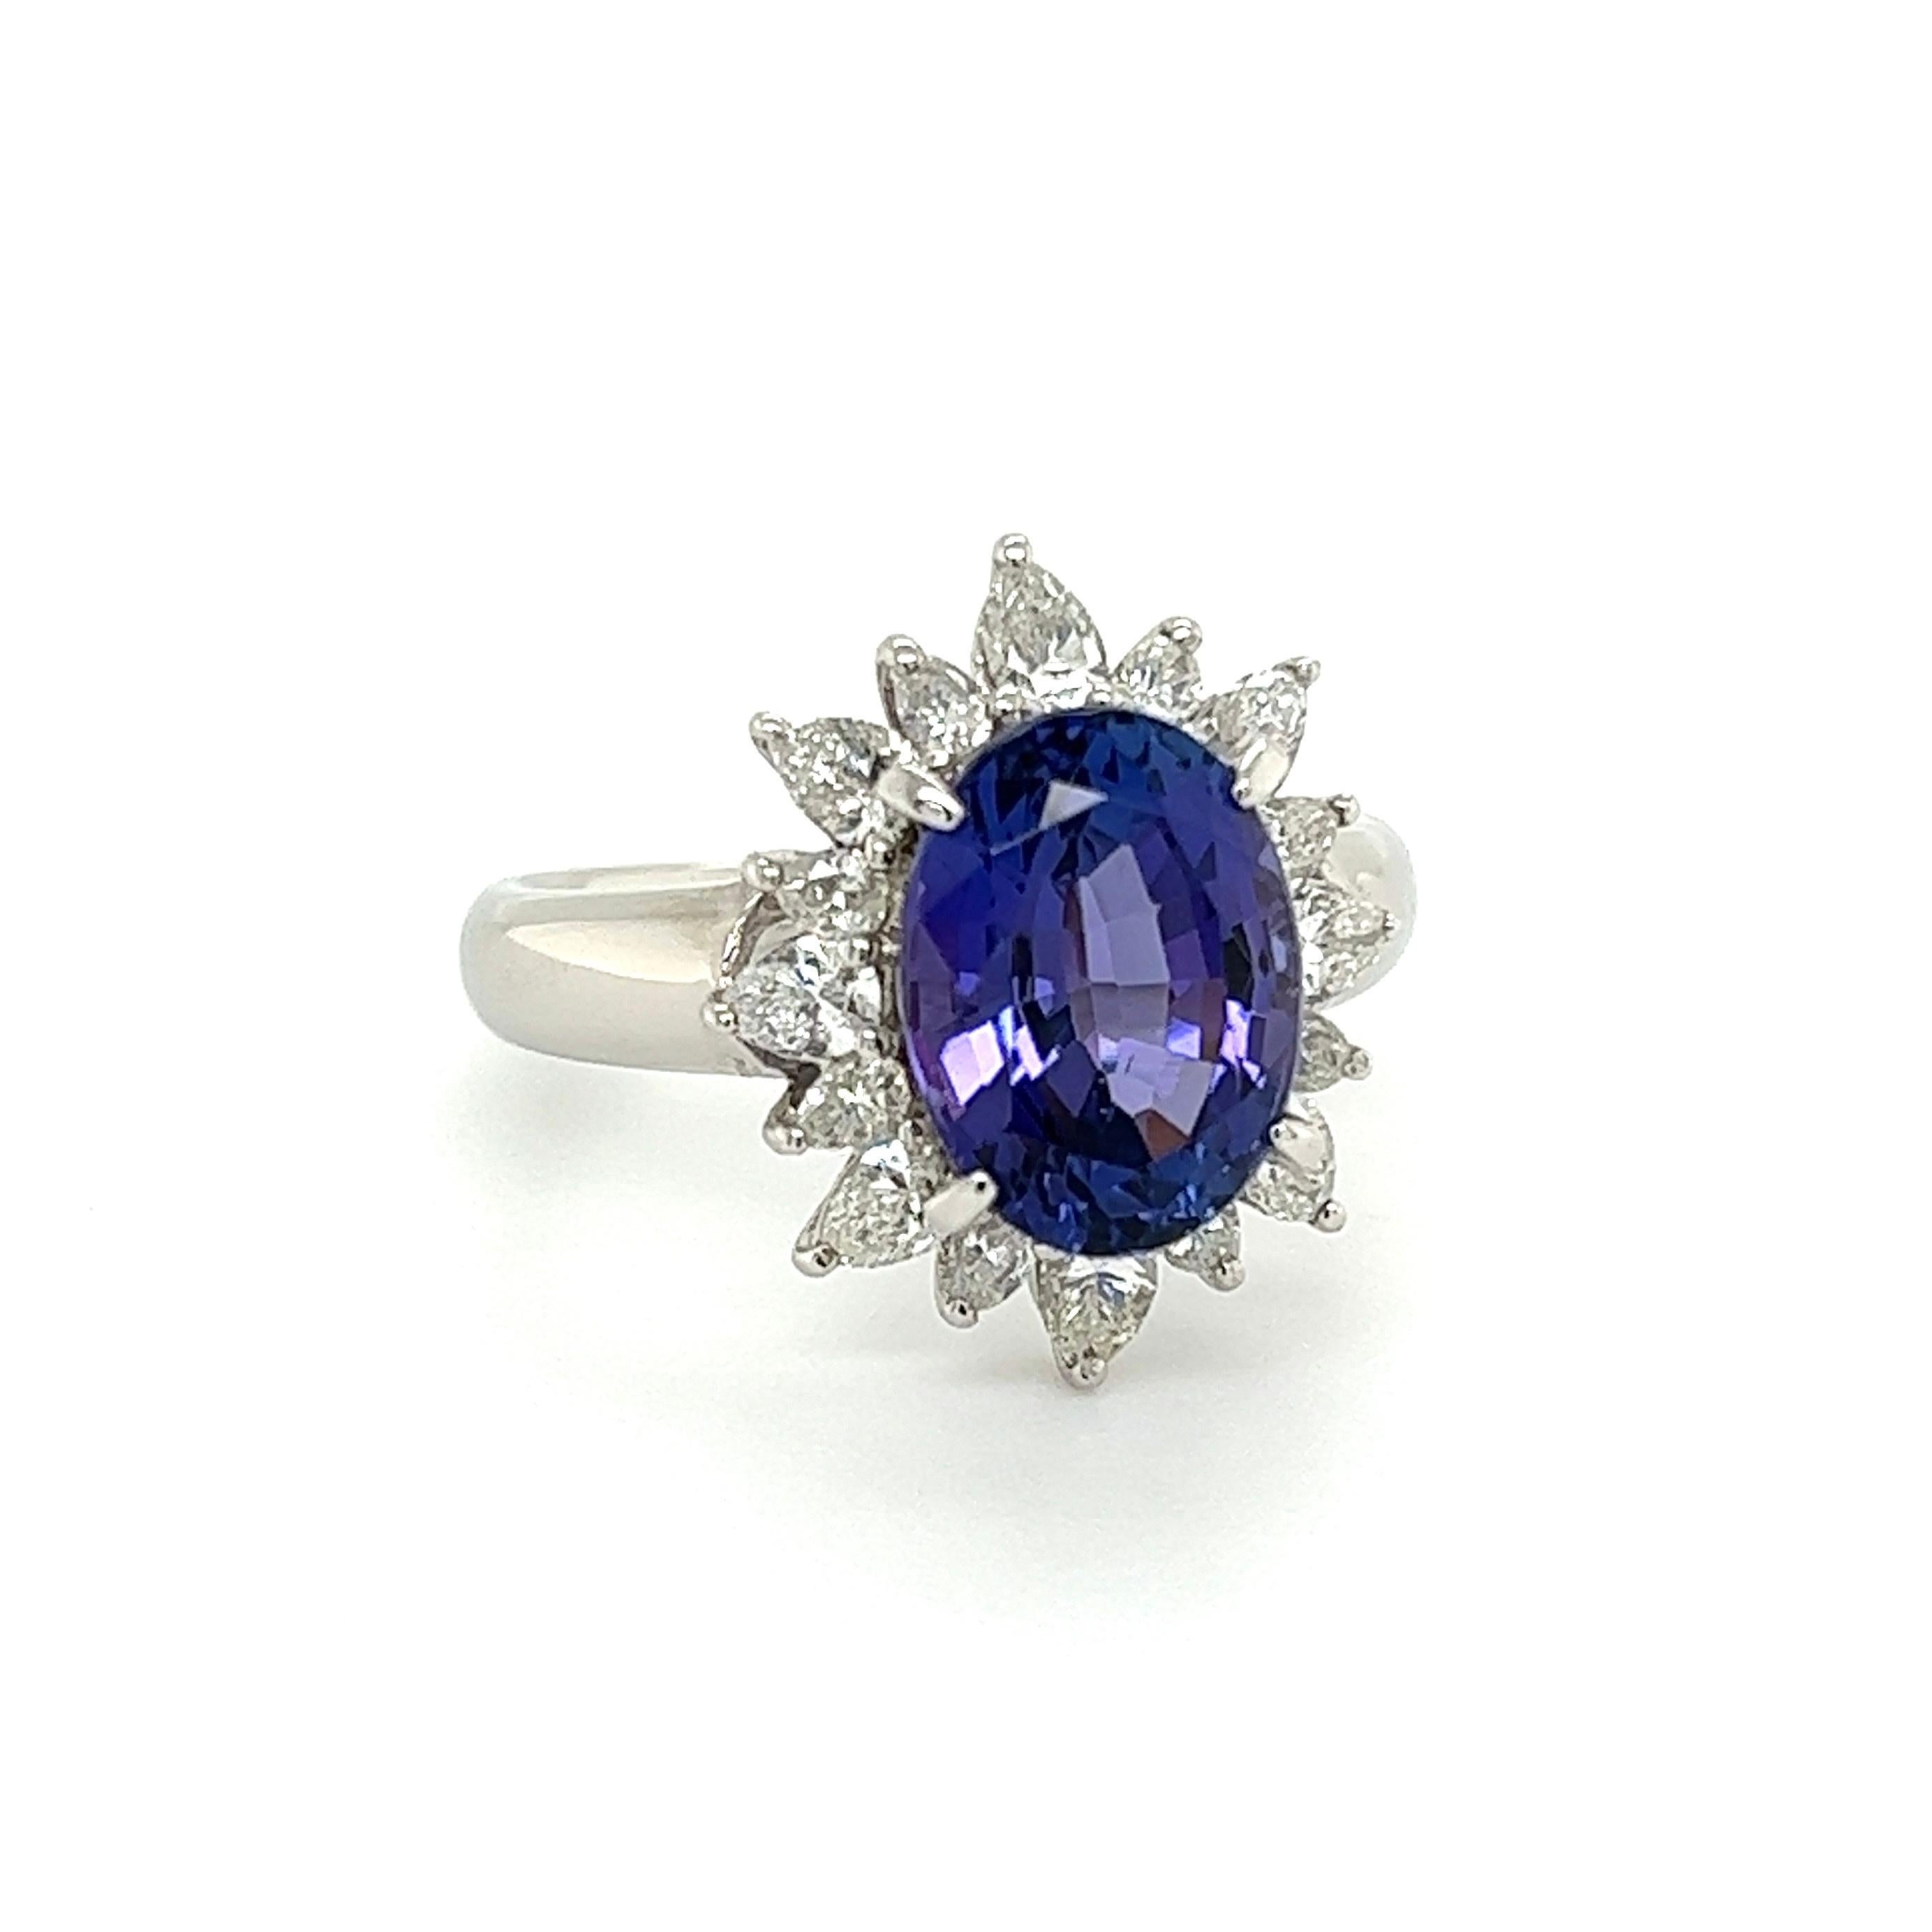 Simply Beautiful! Finely detailed Tanzanite and Diamond Platinum Halo Ring. Centering a securely nestled Hand set Oval 4.00 Carat Tanzanite, surrounded by Pear Diamonds, weighing approx. 1.02tcw, including shank. Hand crafted Platinum mounting.